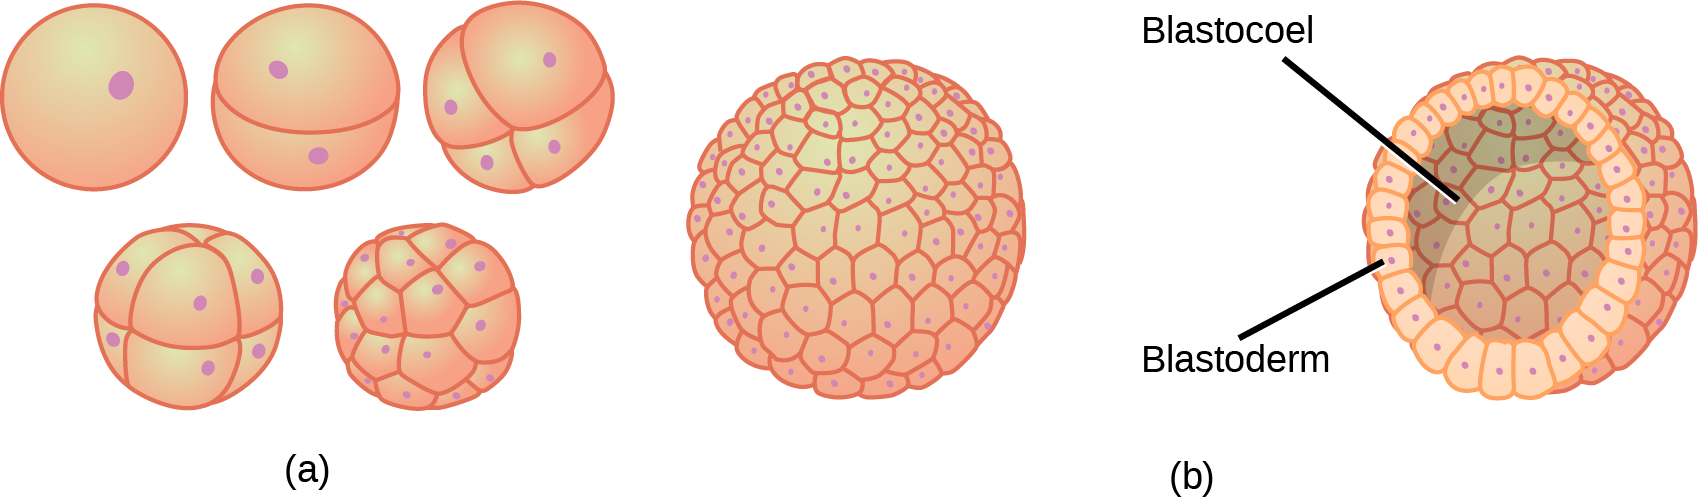 Part A illustration shows a fertilized egg divided into two, four, eight, sixteen and thirty-two cells. Part B shows a hollow ball of cells. The cells on the surface are called the blastoderm, and the hollow center is called the blastocoel.